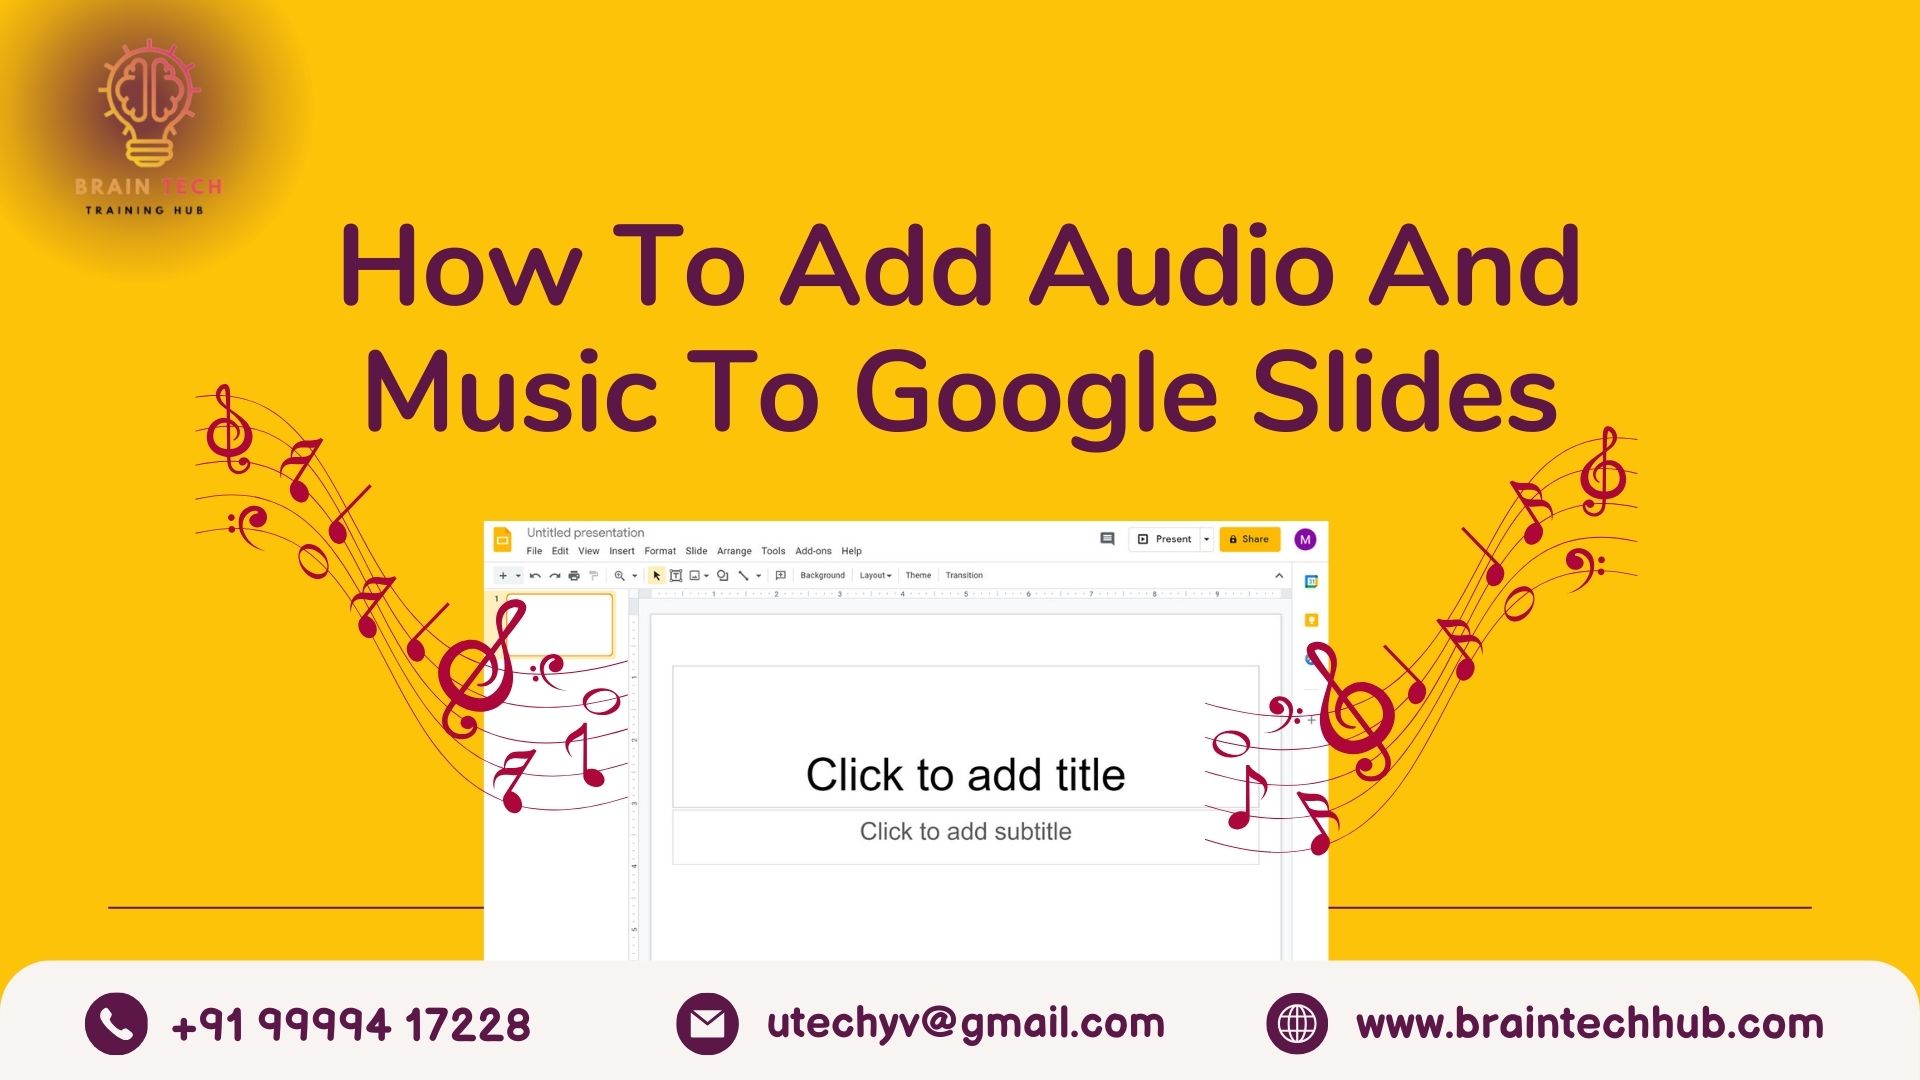 How To Add Audio And Music To Google Slides